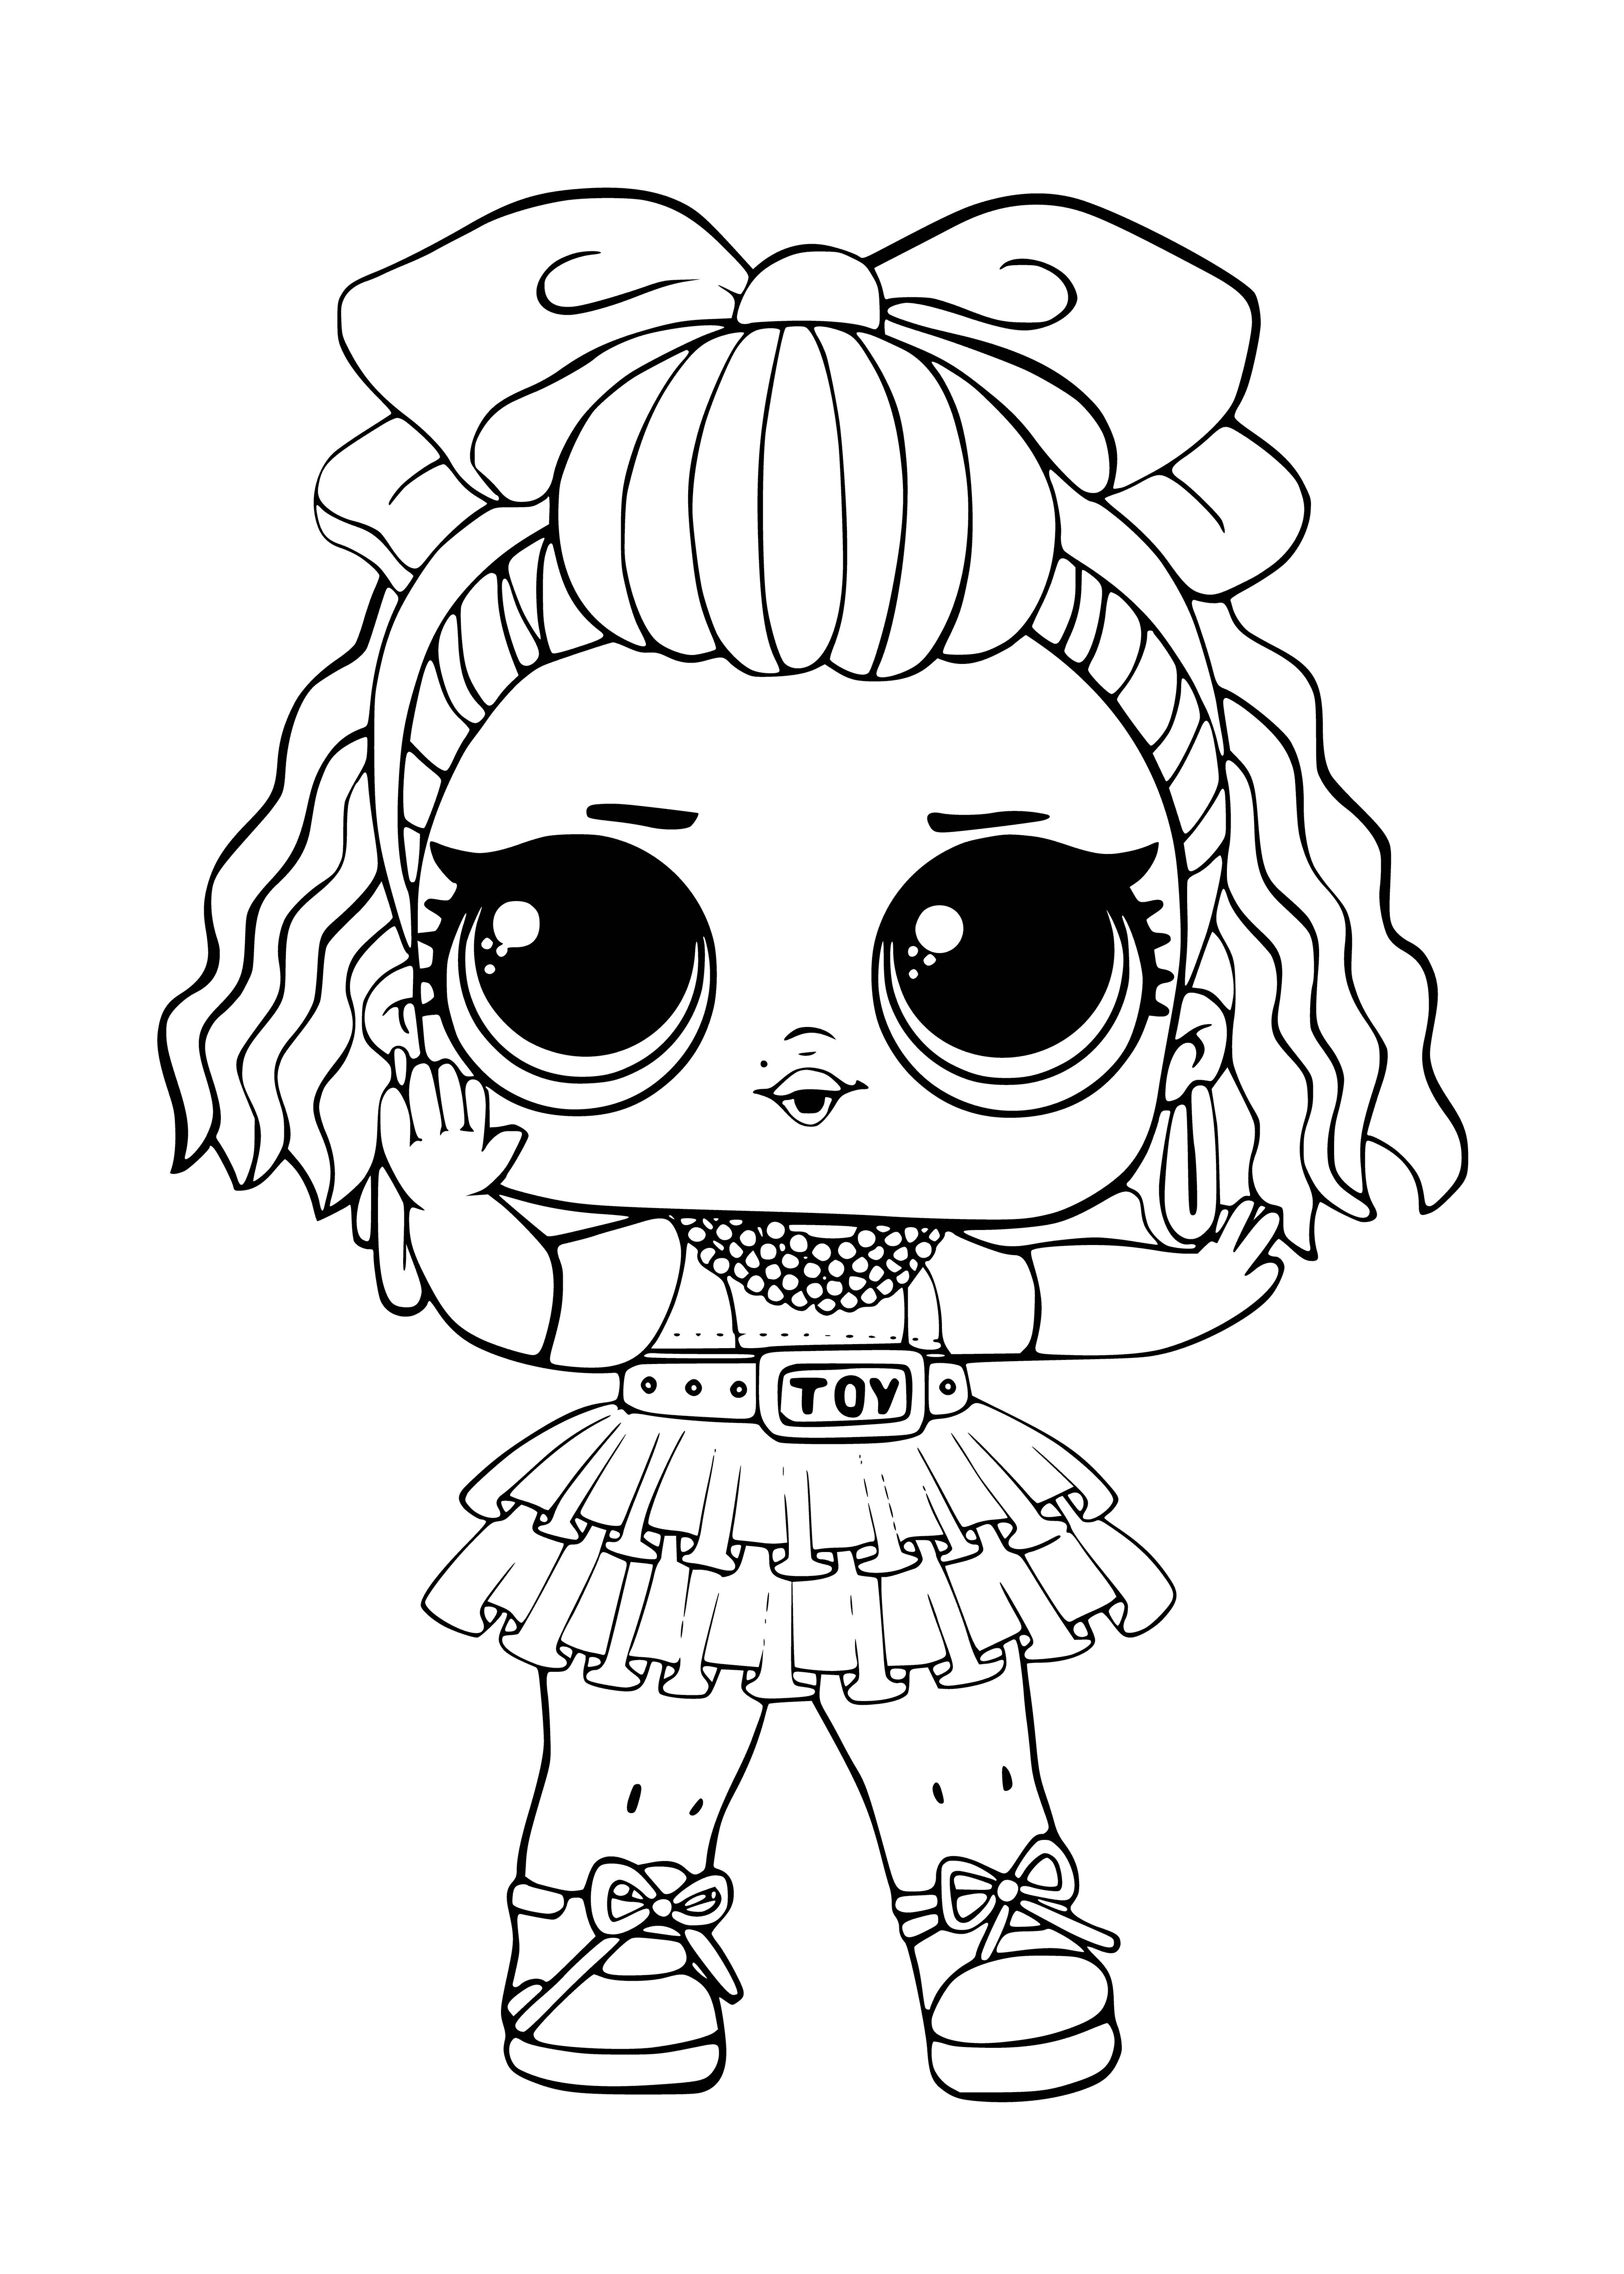 LOL 80s BB coloring page